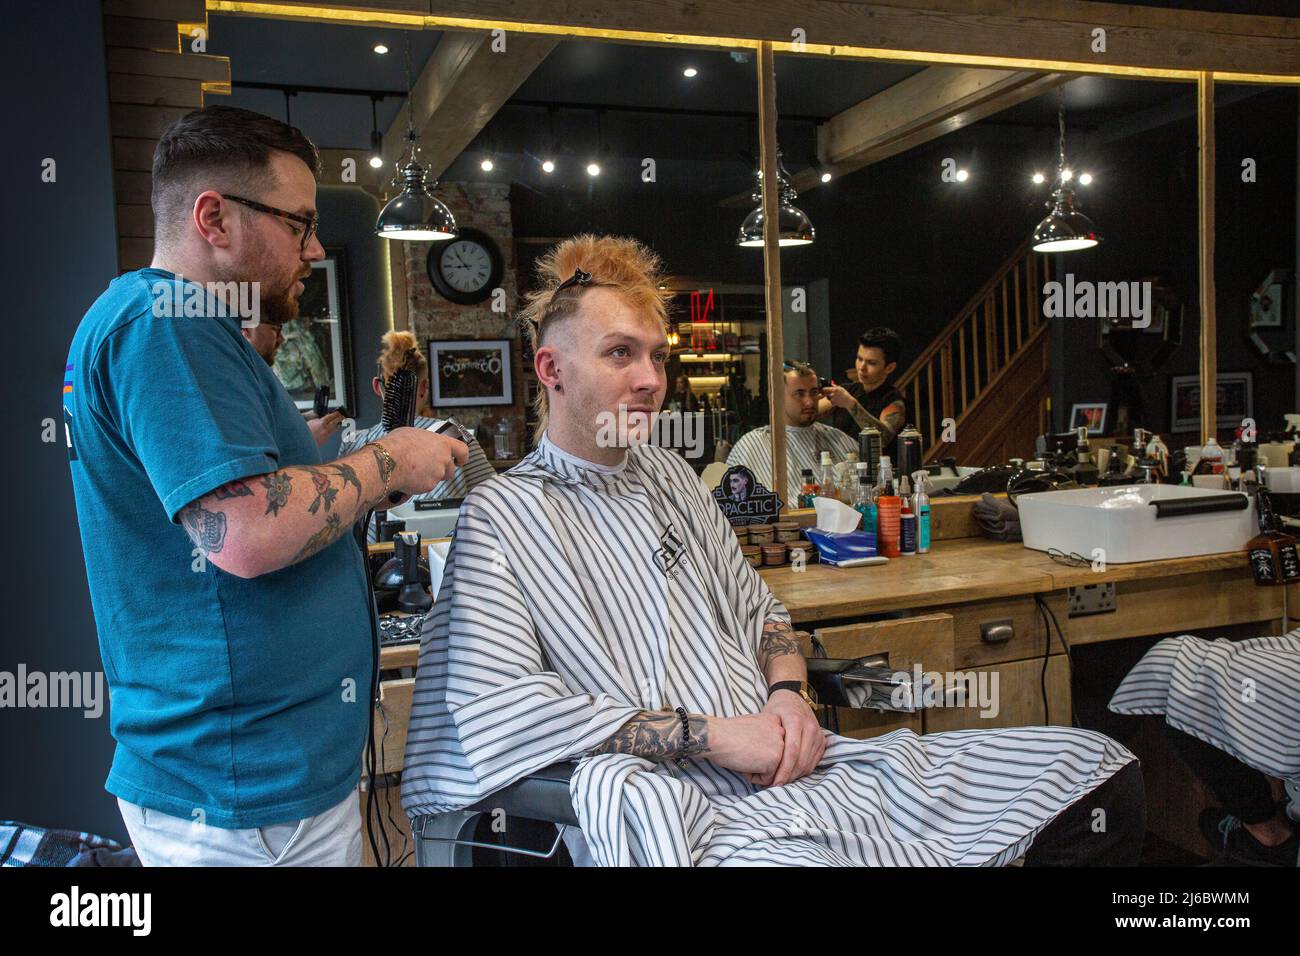 Barber cutting hair at a barber shop Wakefield,West Yorkshire, England. Stock Photo